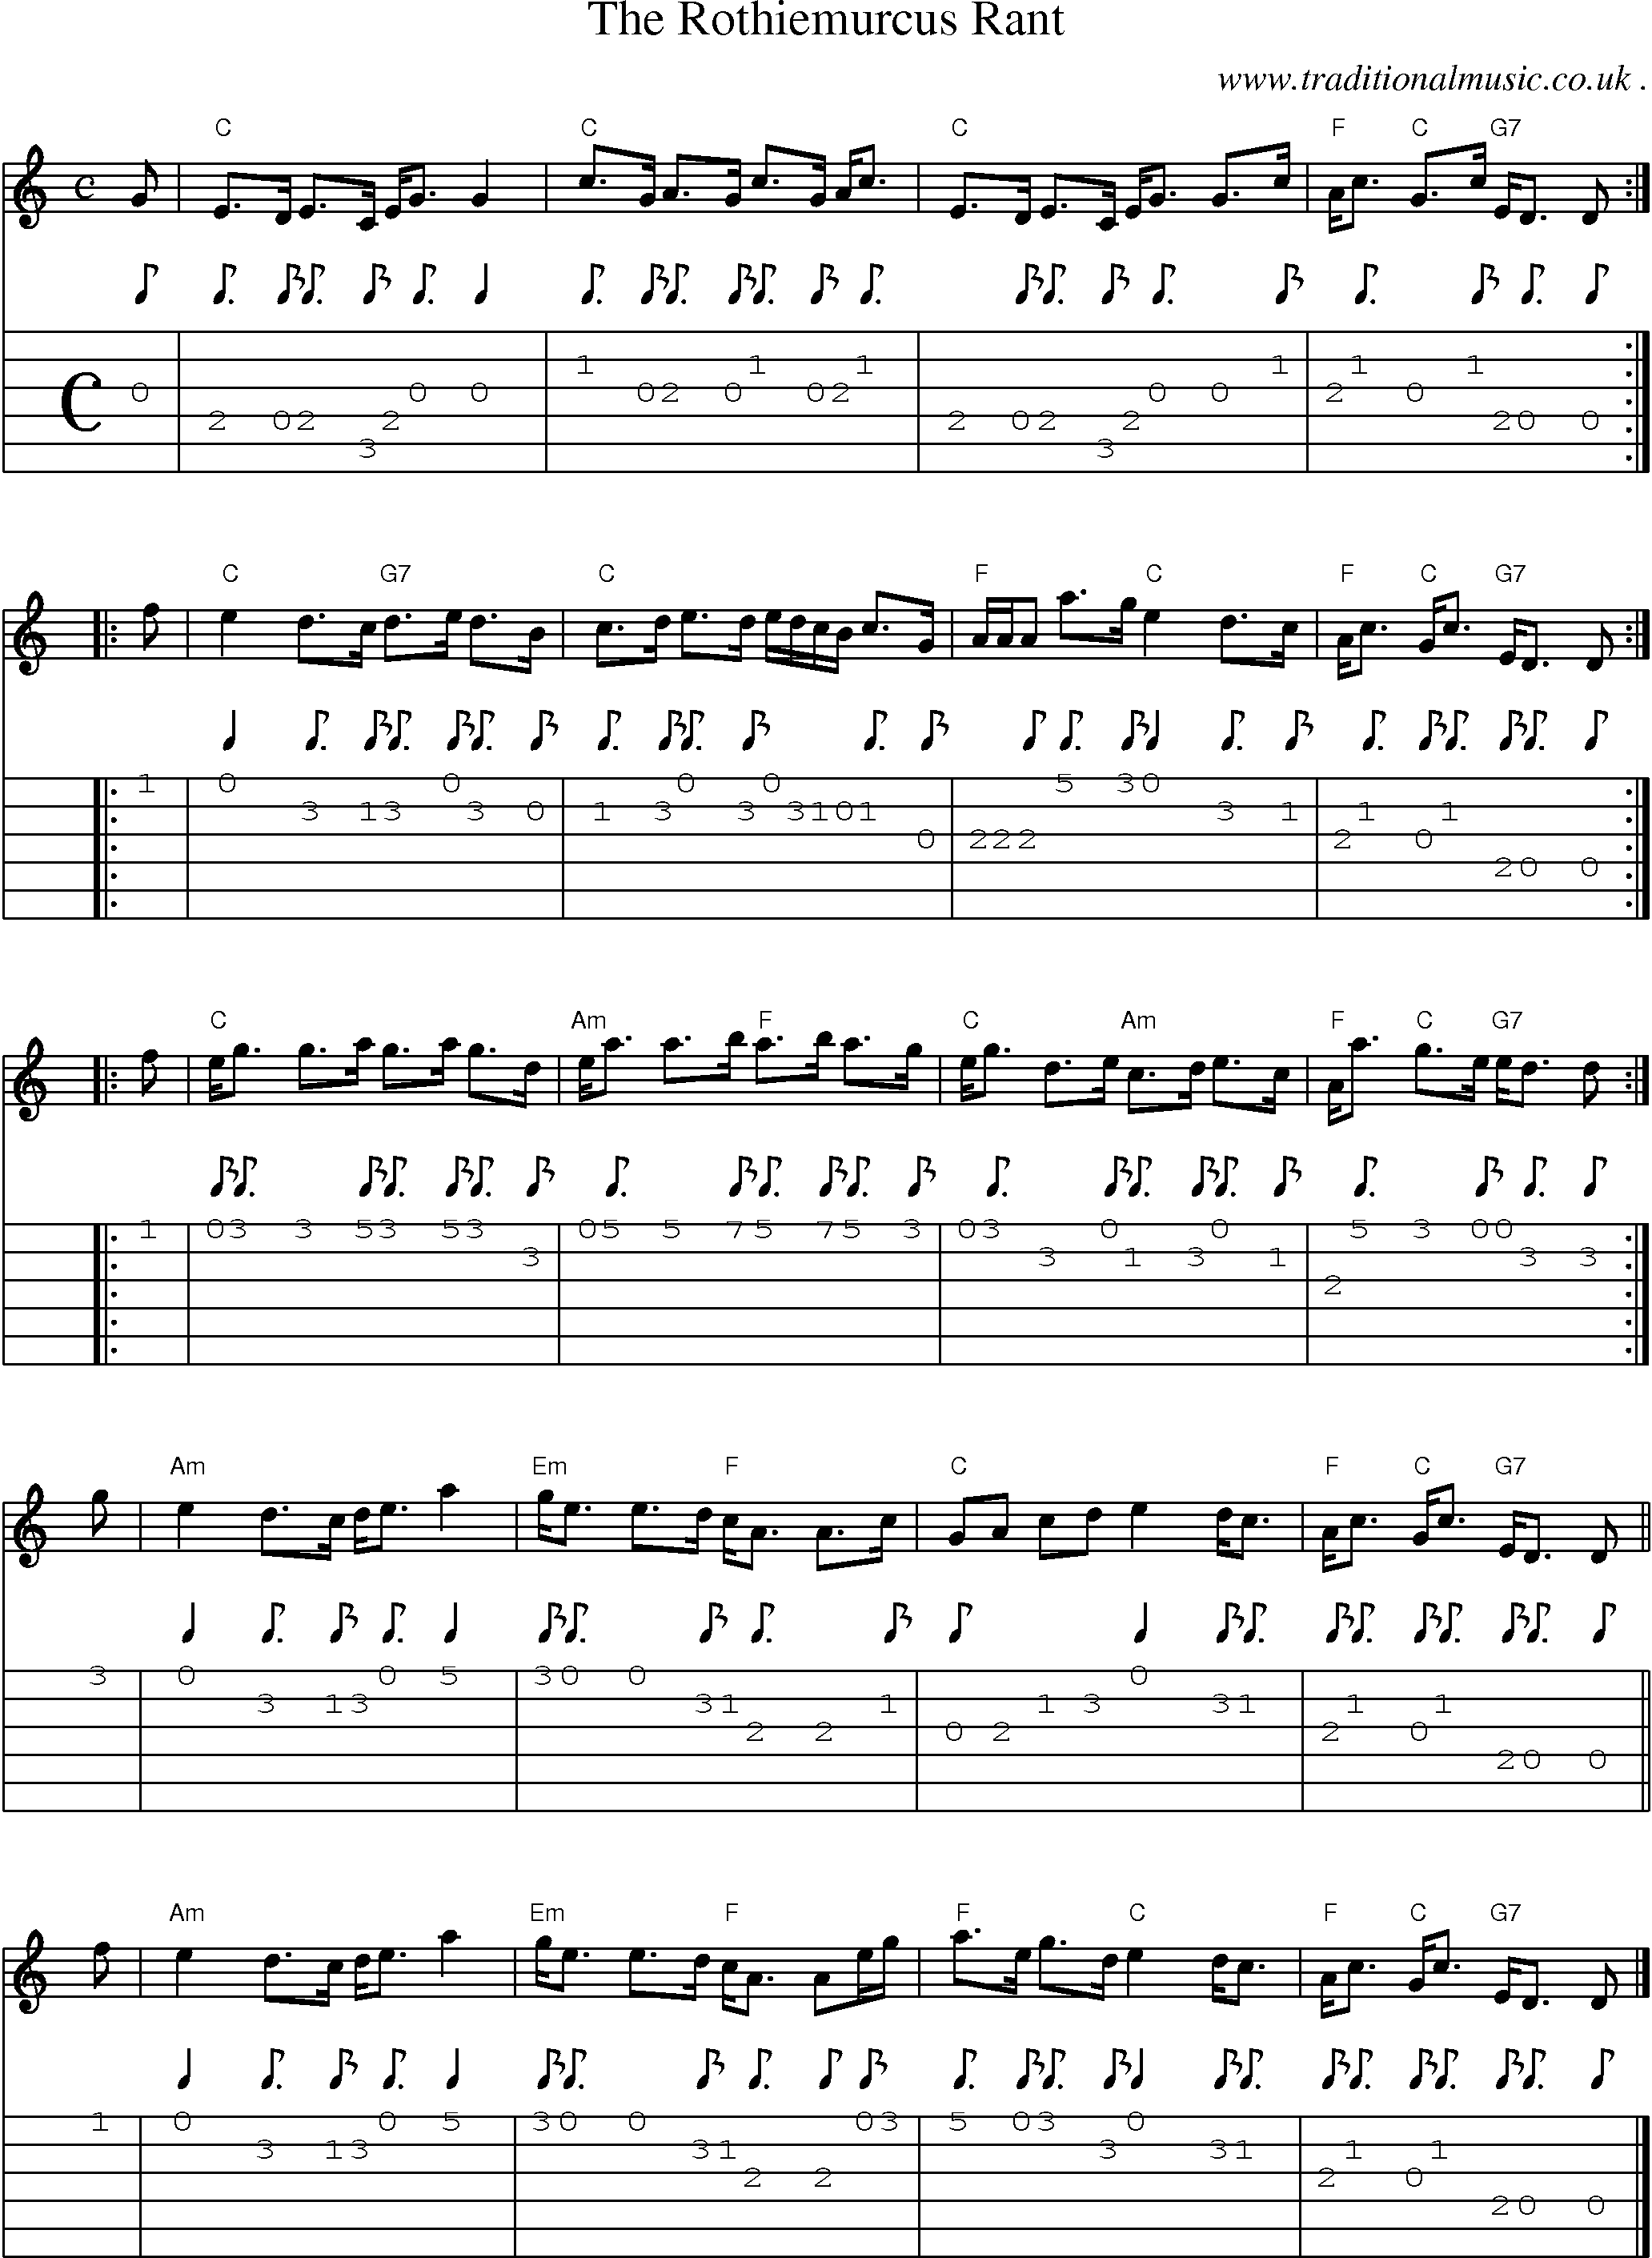 Sheet-music  score, Chords and Guitar Tabs for The Rothiemurcus Rant